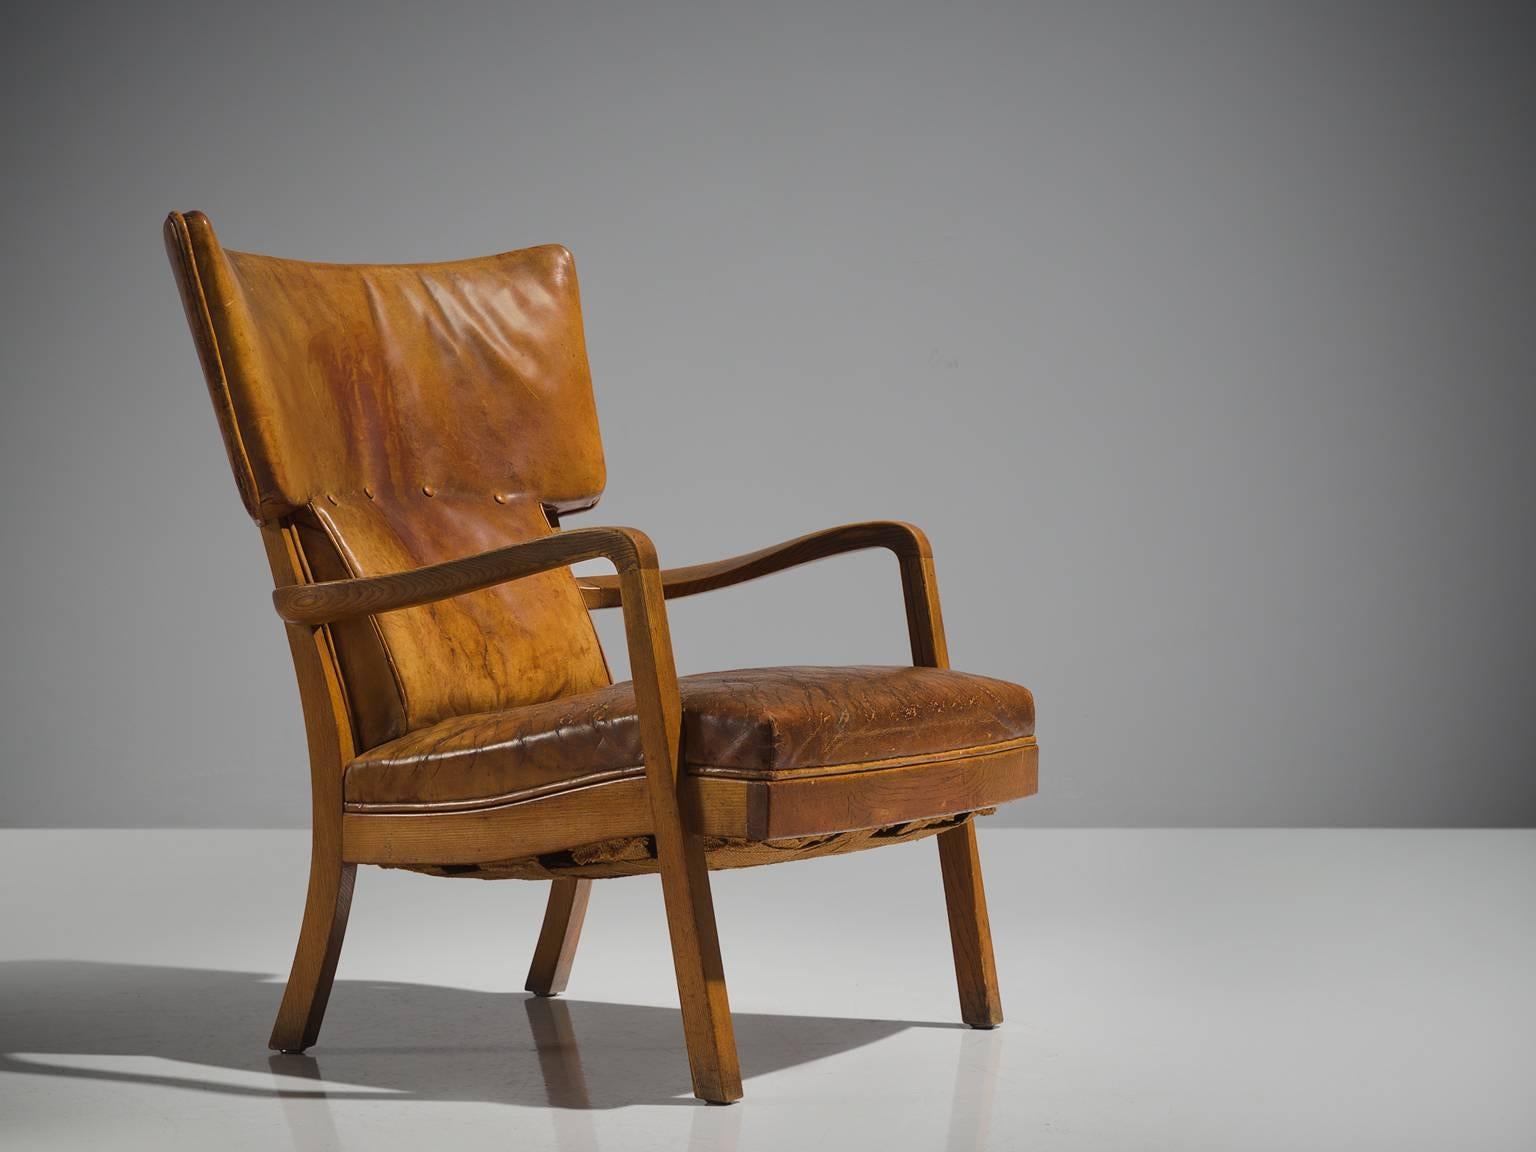 Peter Hvidt for Ludvig Pontoppidan, wingback chair, cognac leather and elm, Denmark, 1943.

This chair is made by Peter Hvidt for the reknown cabinetmaker Ludvig Pontoppidan. The chair has a strong, robust appearance thanks to the thick elm frame